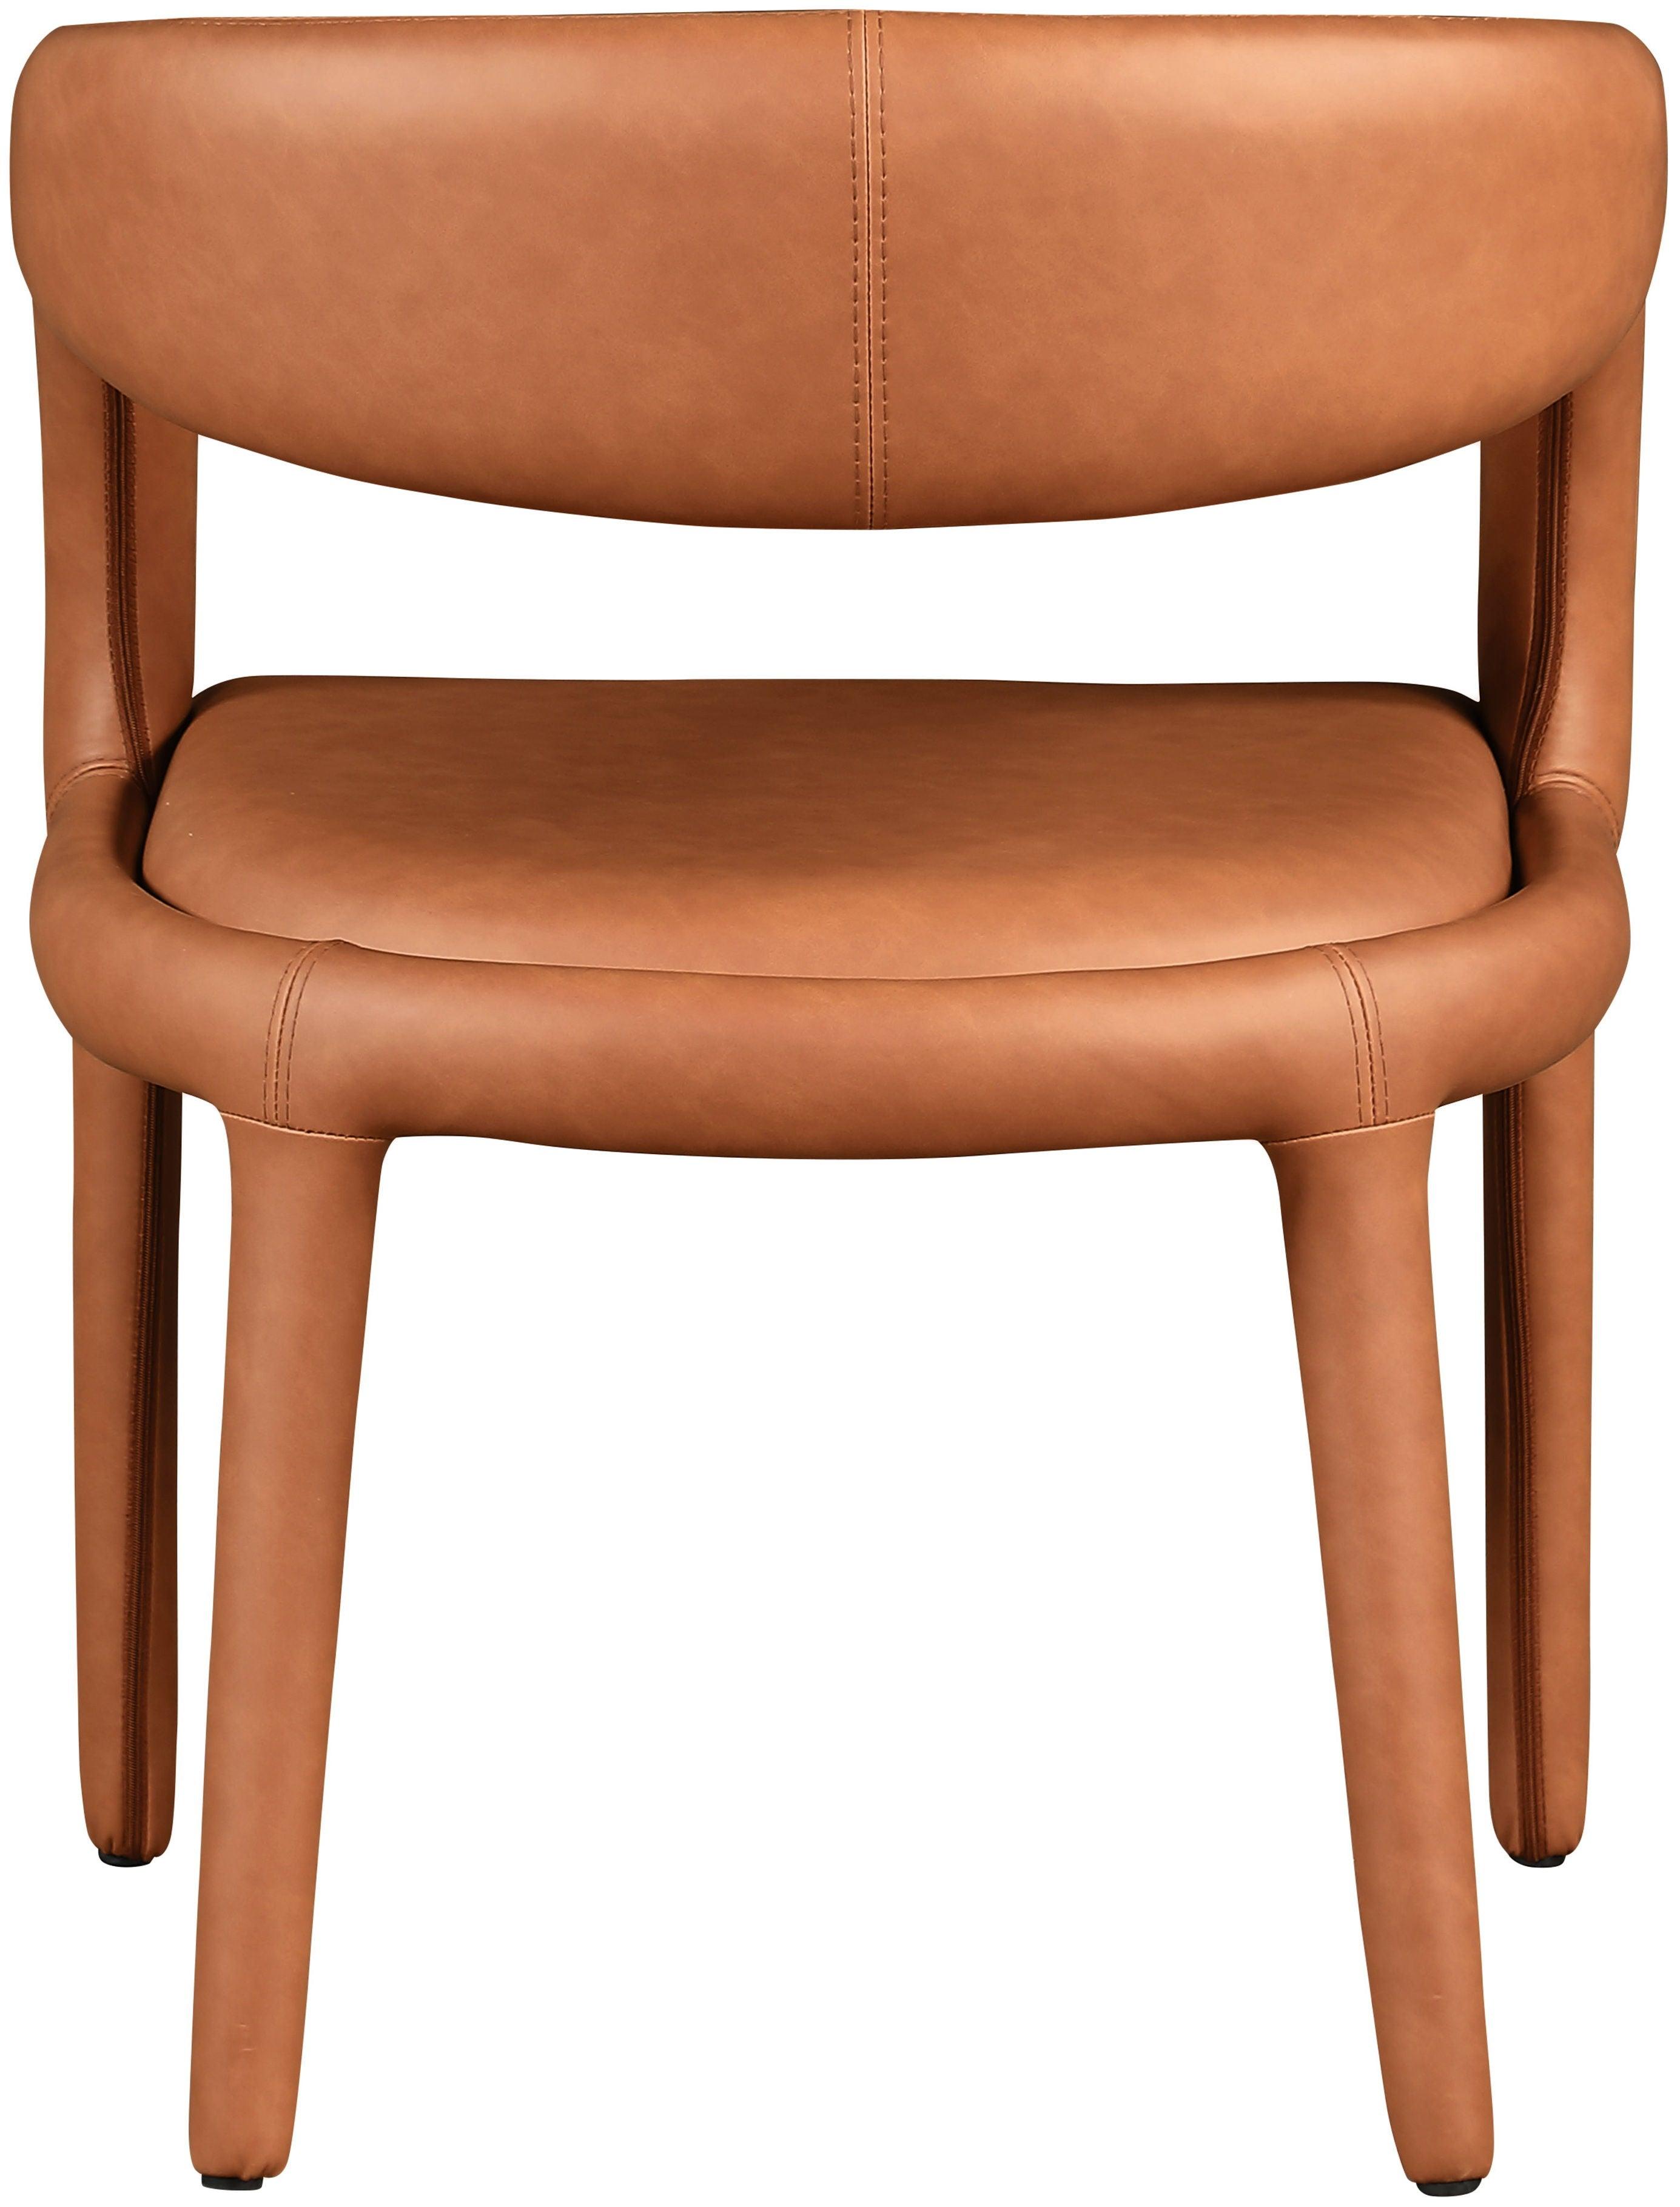 Meridian Furniture - Sylvester - Dining Chair - Cognac - 5th Avenue Furniture